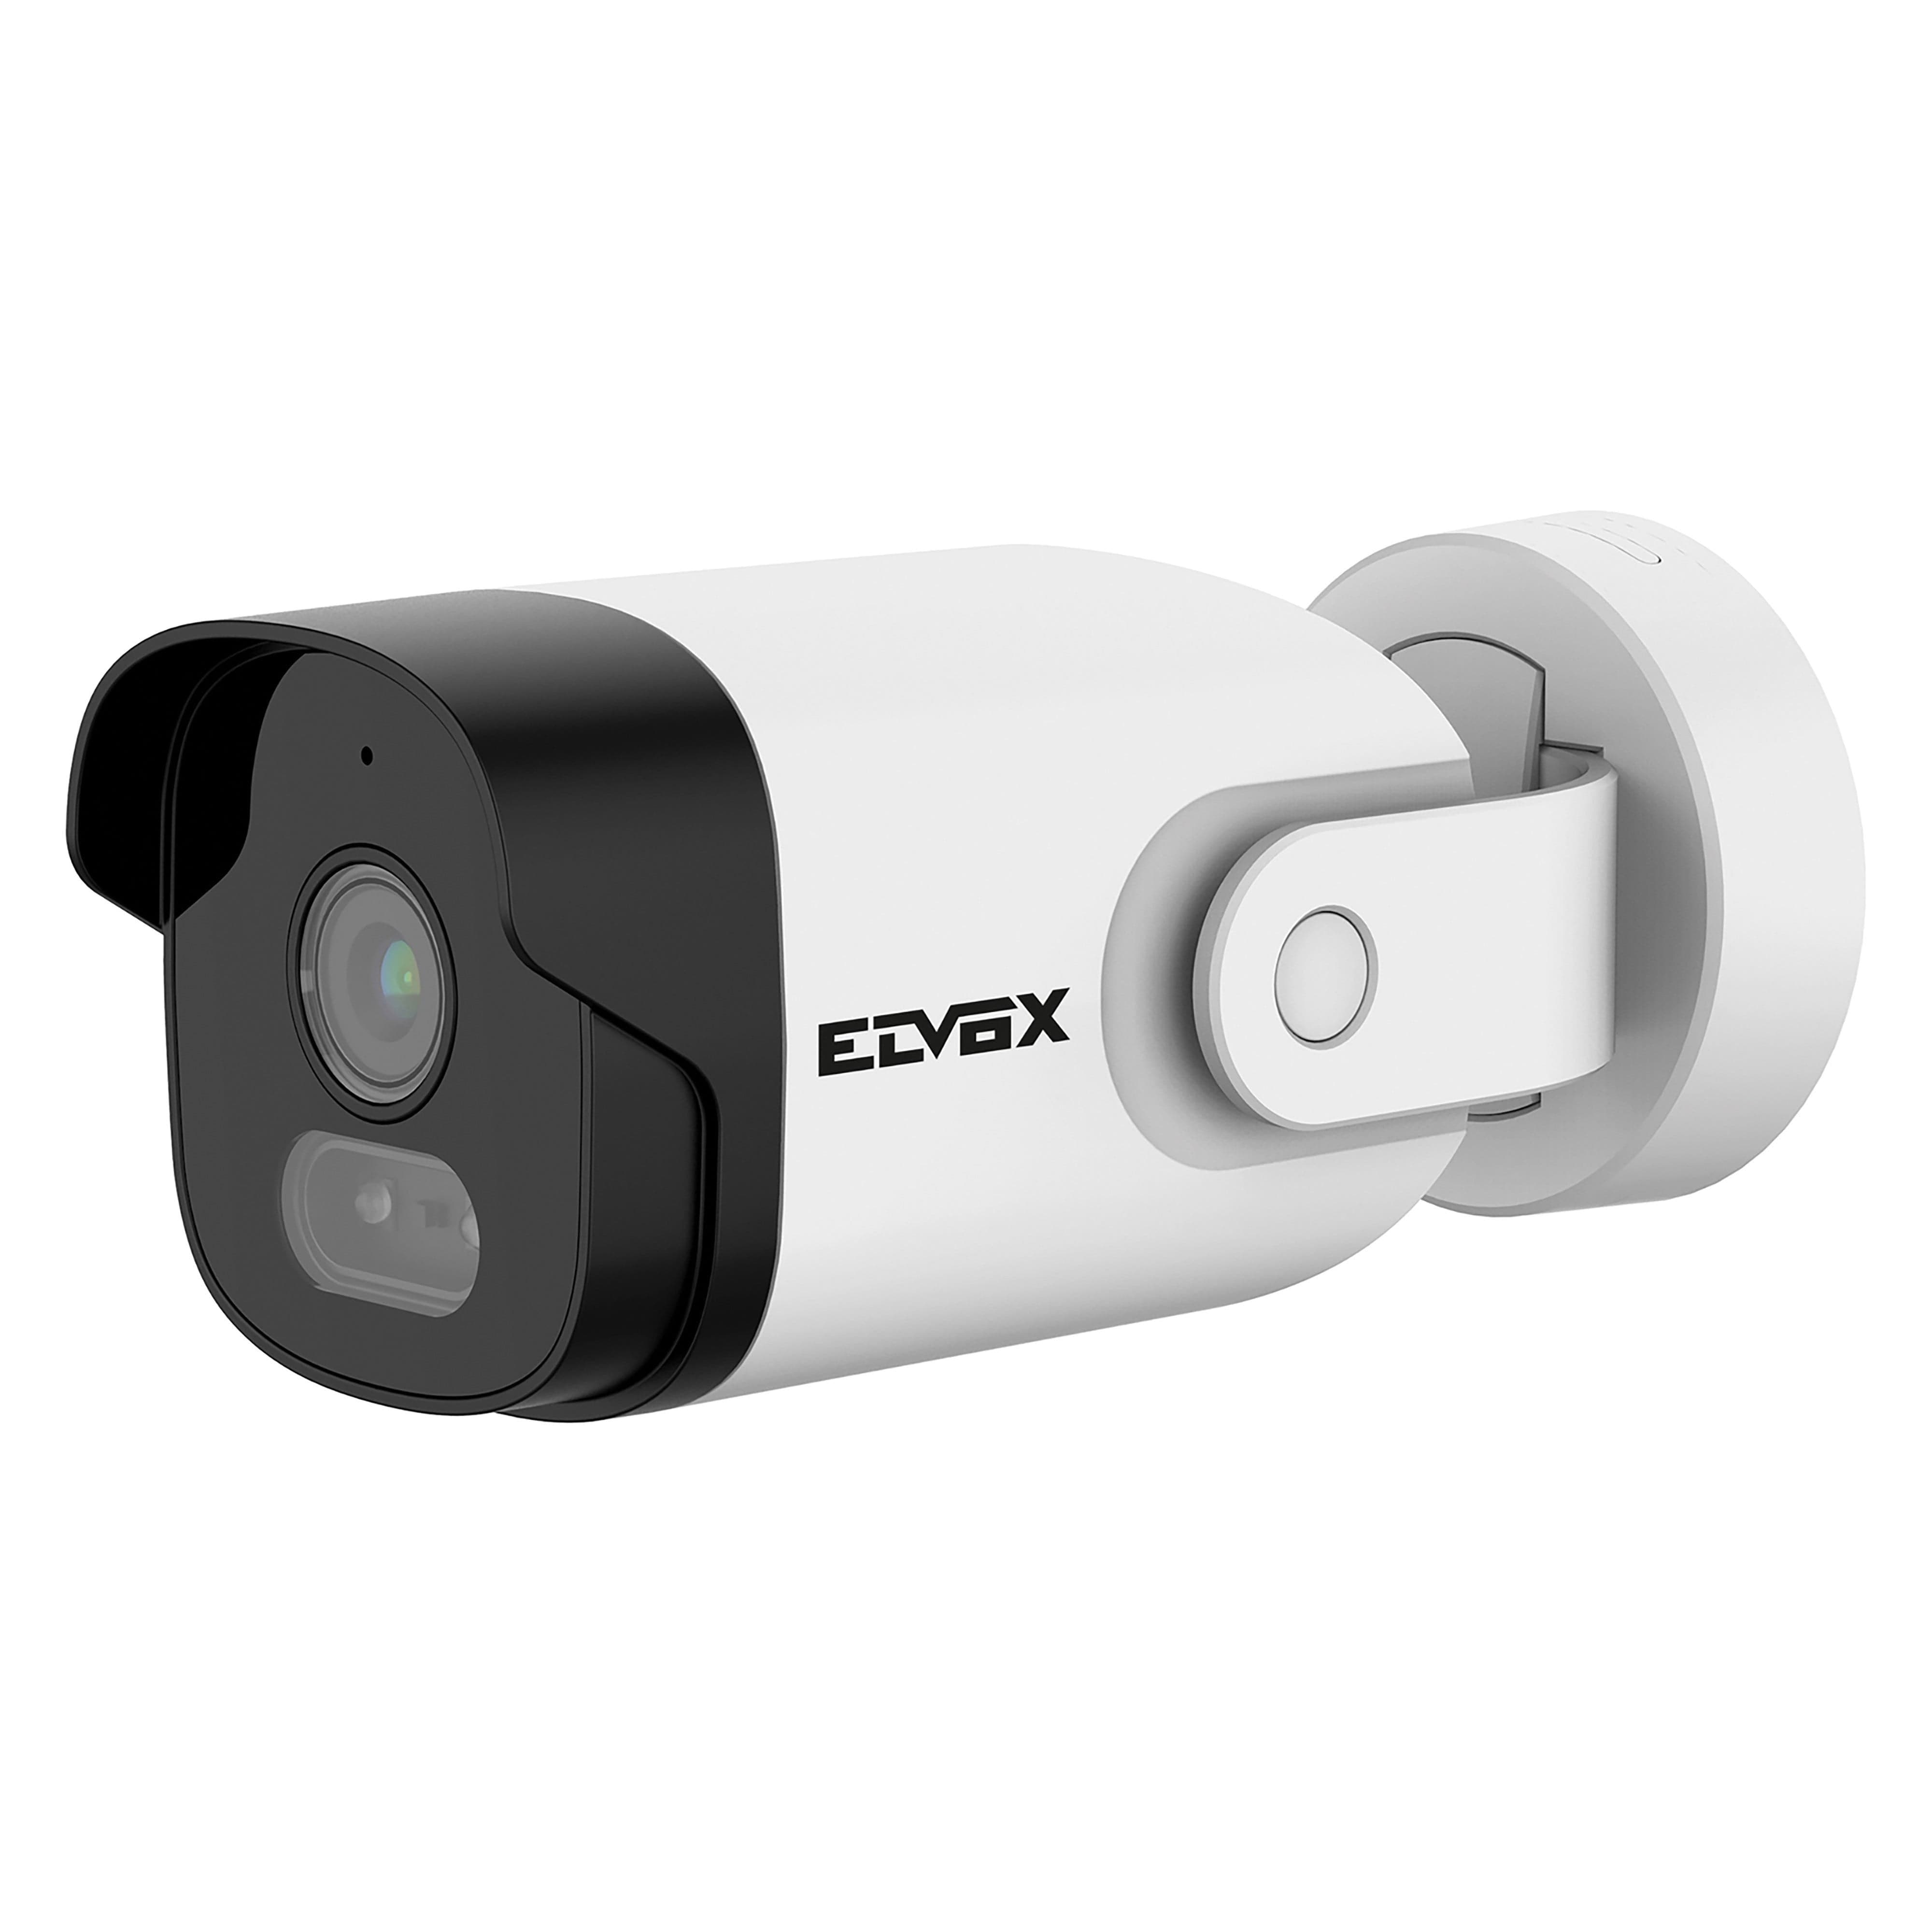 Vimar elvox bullet wifi full hd outdoor 1080p camera with 2.8 mm lens, 120° vision diag